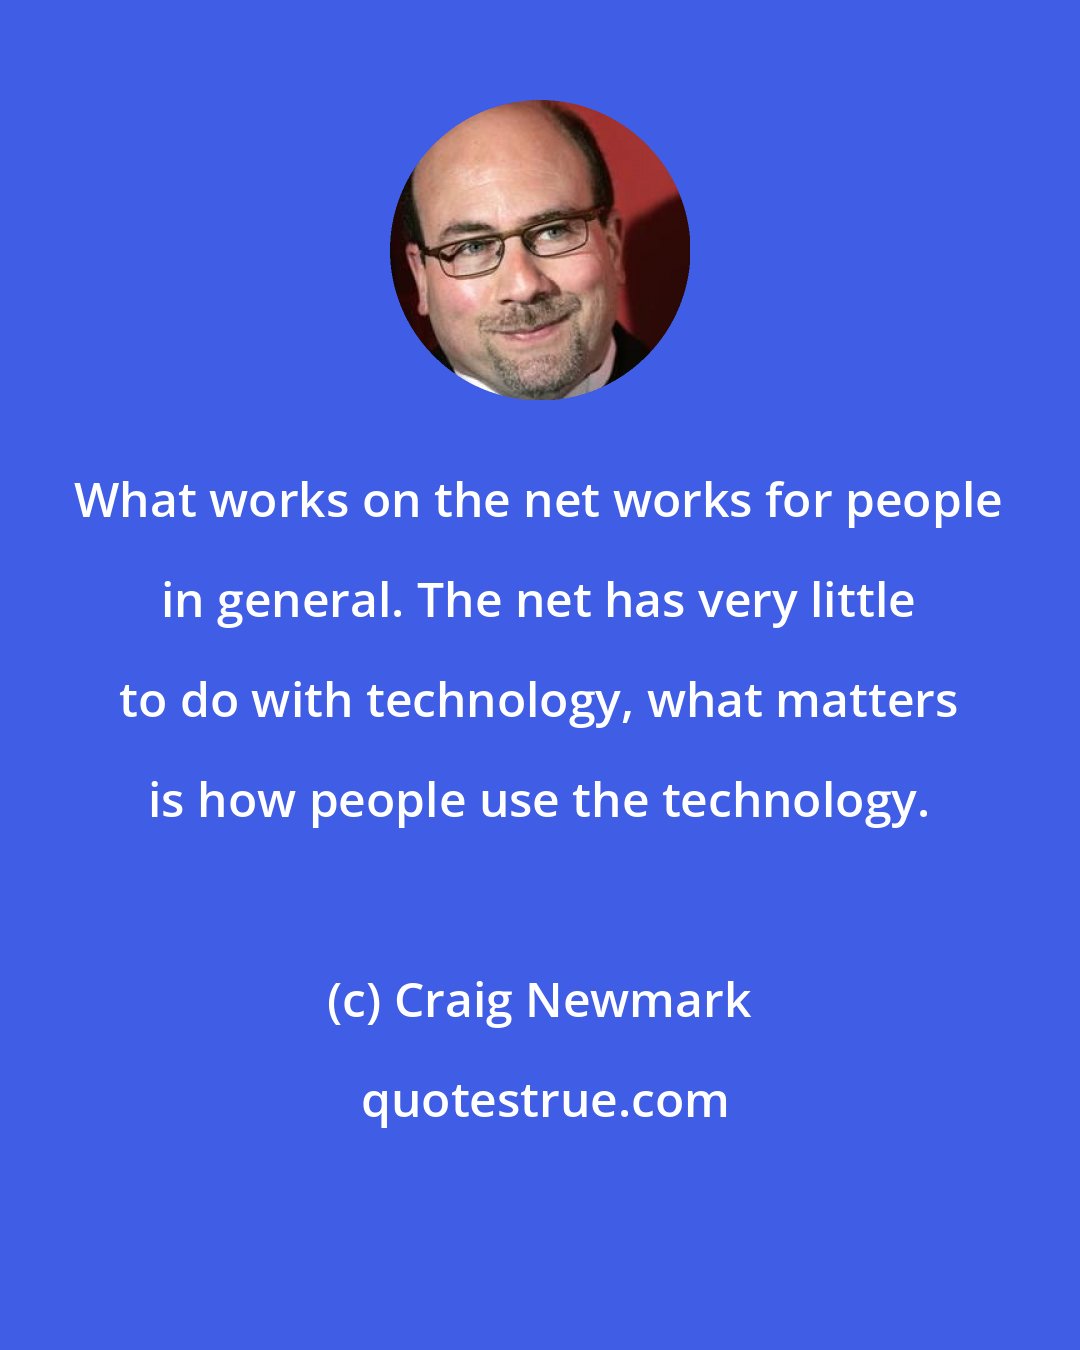 Craig Newmark: What works on the net works for people in general. The net has very little to do with technology, what matters is how people use the technology.